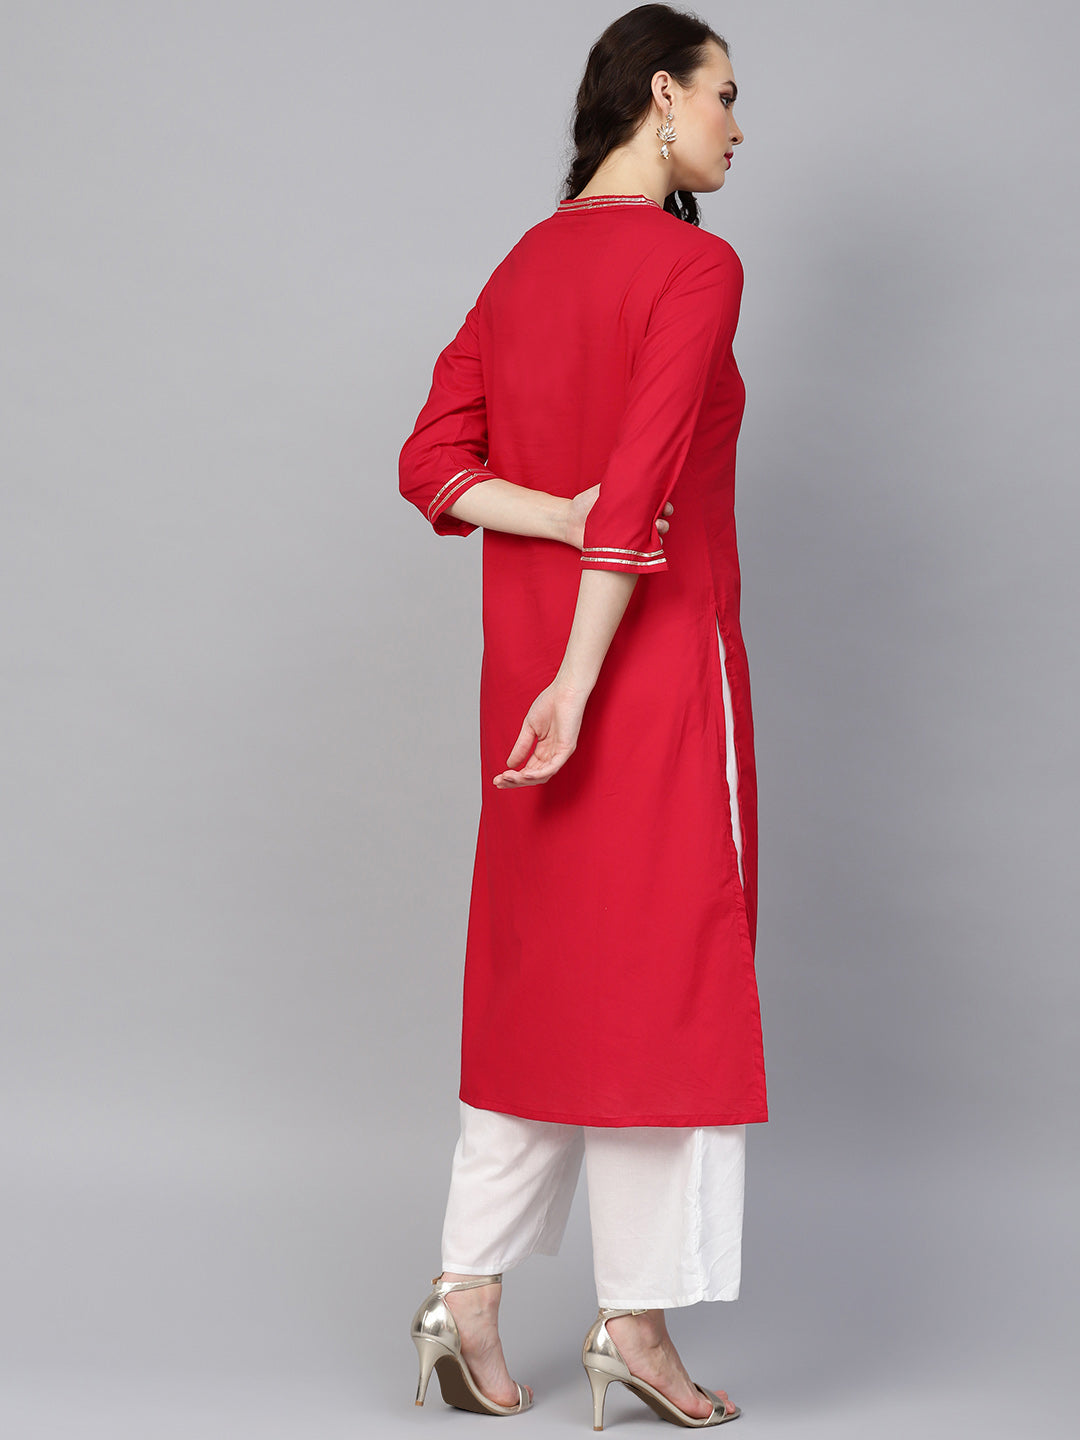 Women's Red Solid Kurta With Off White Solid Palazzos - Bhama Couture